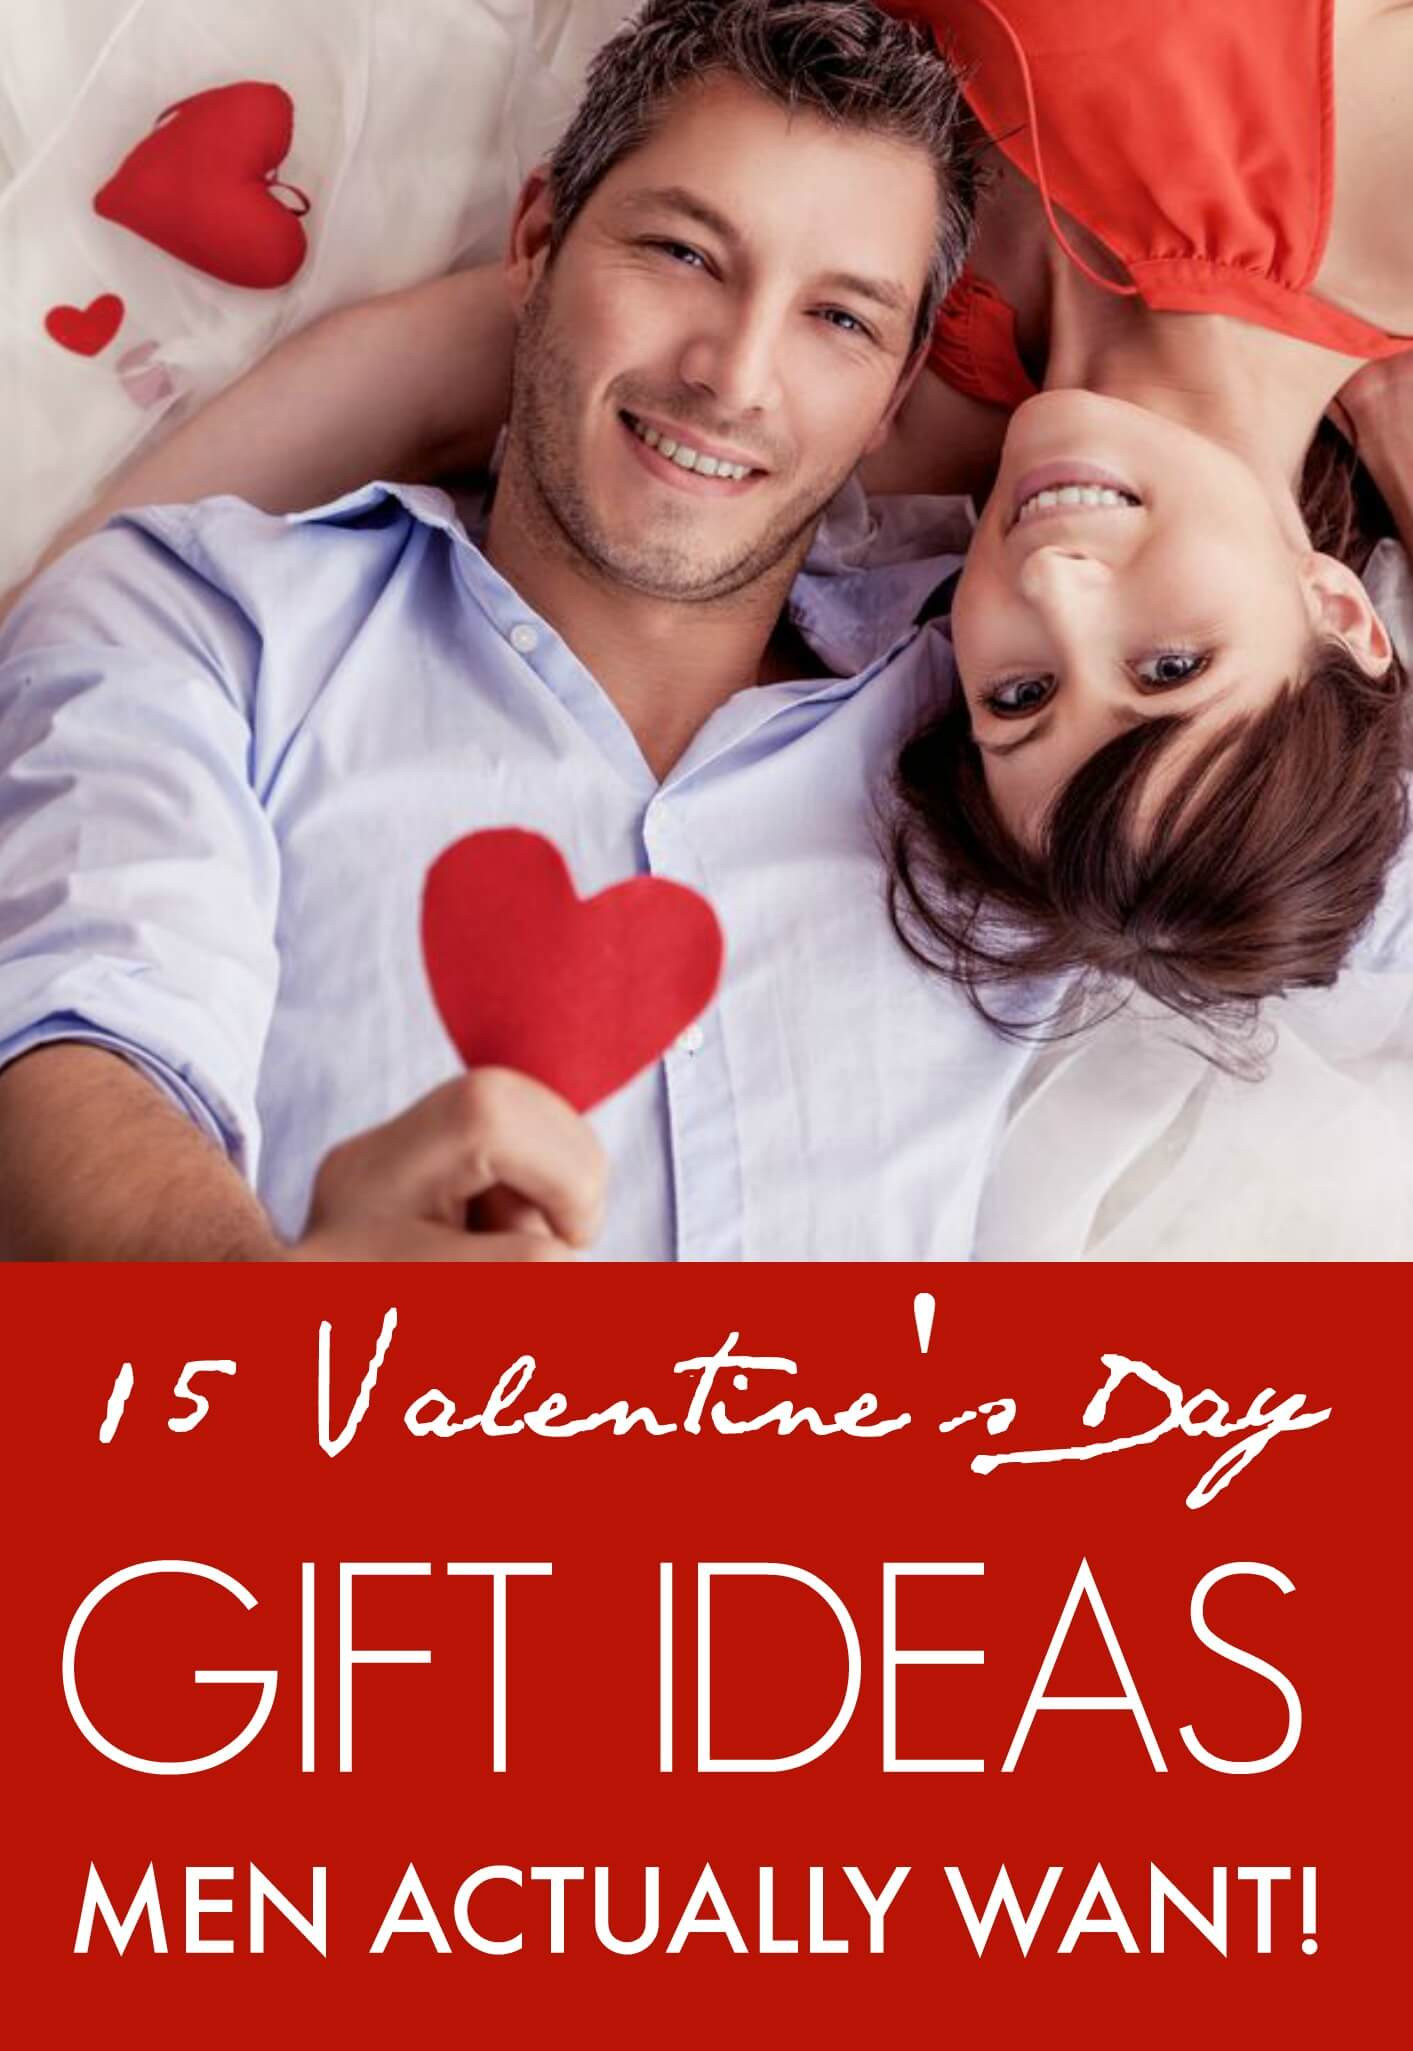 Valentines Guy Gift Ideas
 15 Valentine’s Day Gift ideas Men Actually Want